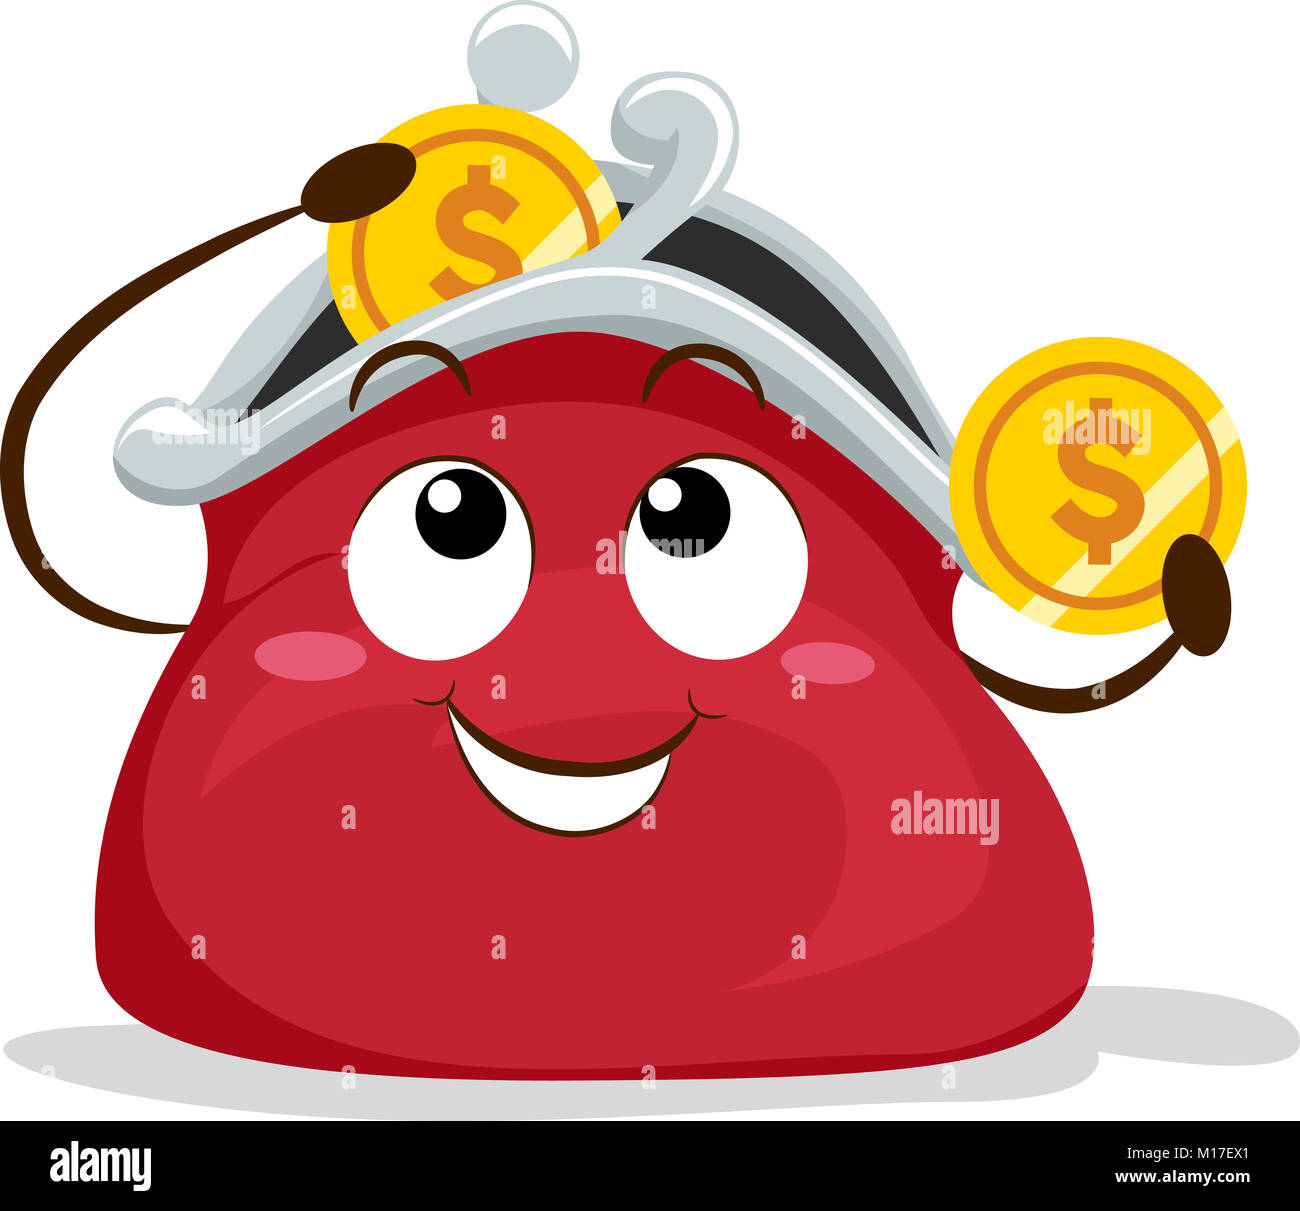 Illustration of a Red Coin Purse Mascot Placing a Coin Inside It Stock  Photo - Alamy